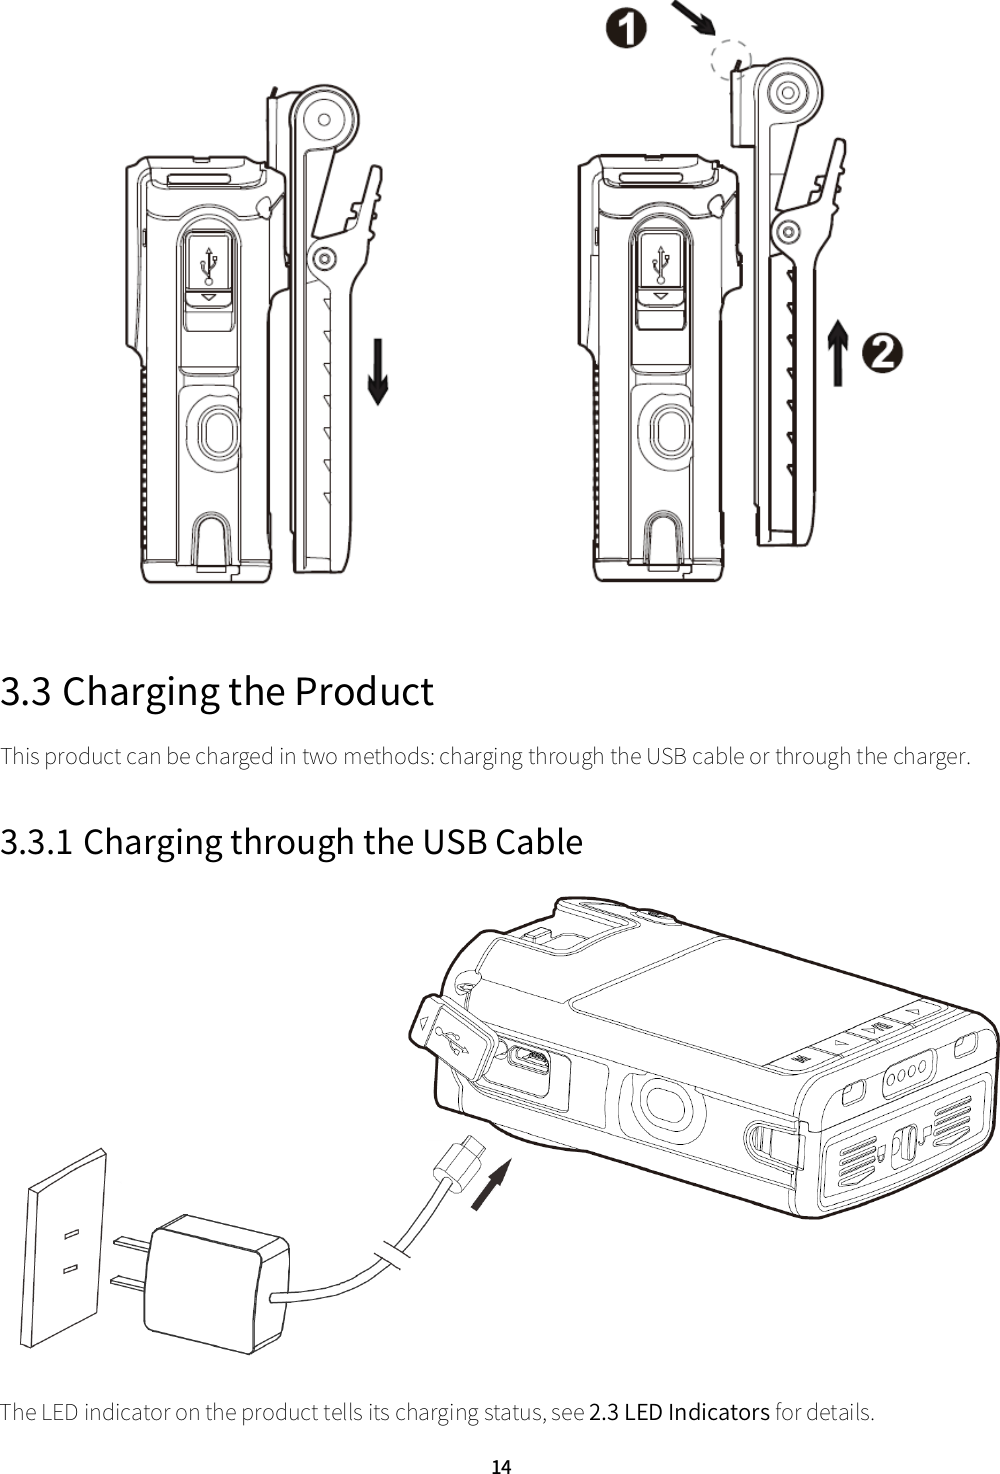  14  3.3 Charging the Product This product can be charged in two methods: charging through the USB cable or through the charger.   3.3.1 Charging through the USB Cable  The LED indicator on the product tells its charging status, see 2.3 LED Indicators for details.   